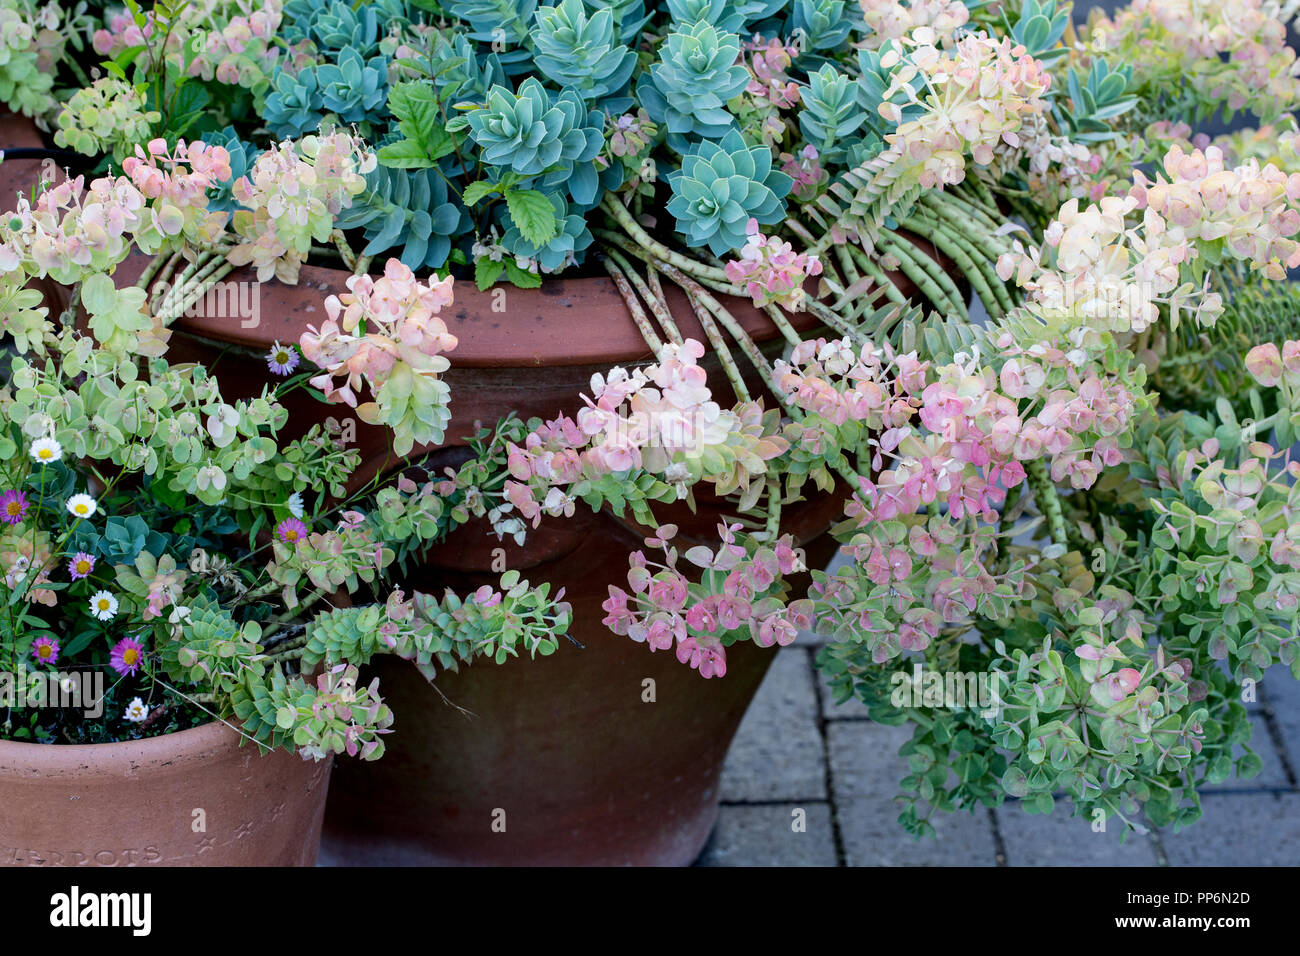 Close up of succulents with pale pink and green blossoms growing in terracotta pots. Stock Photo